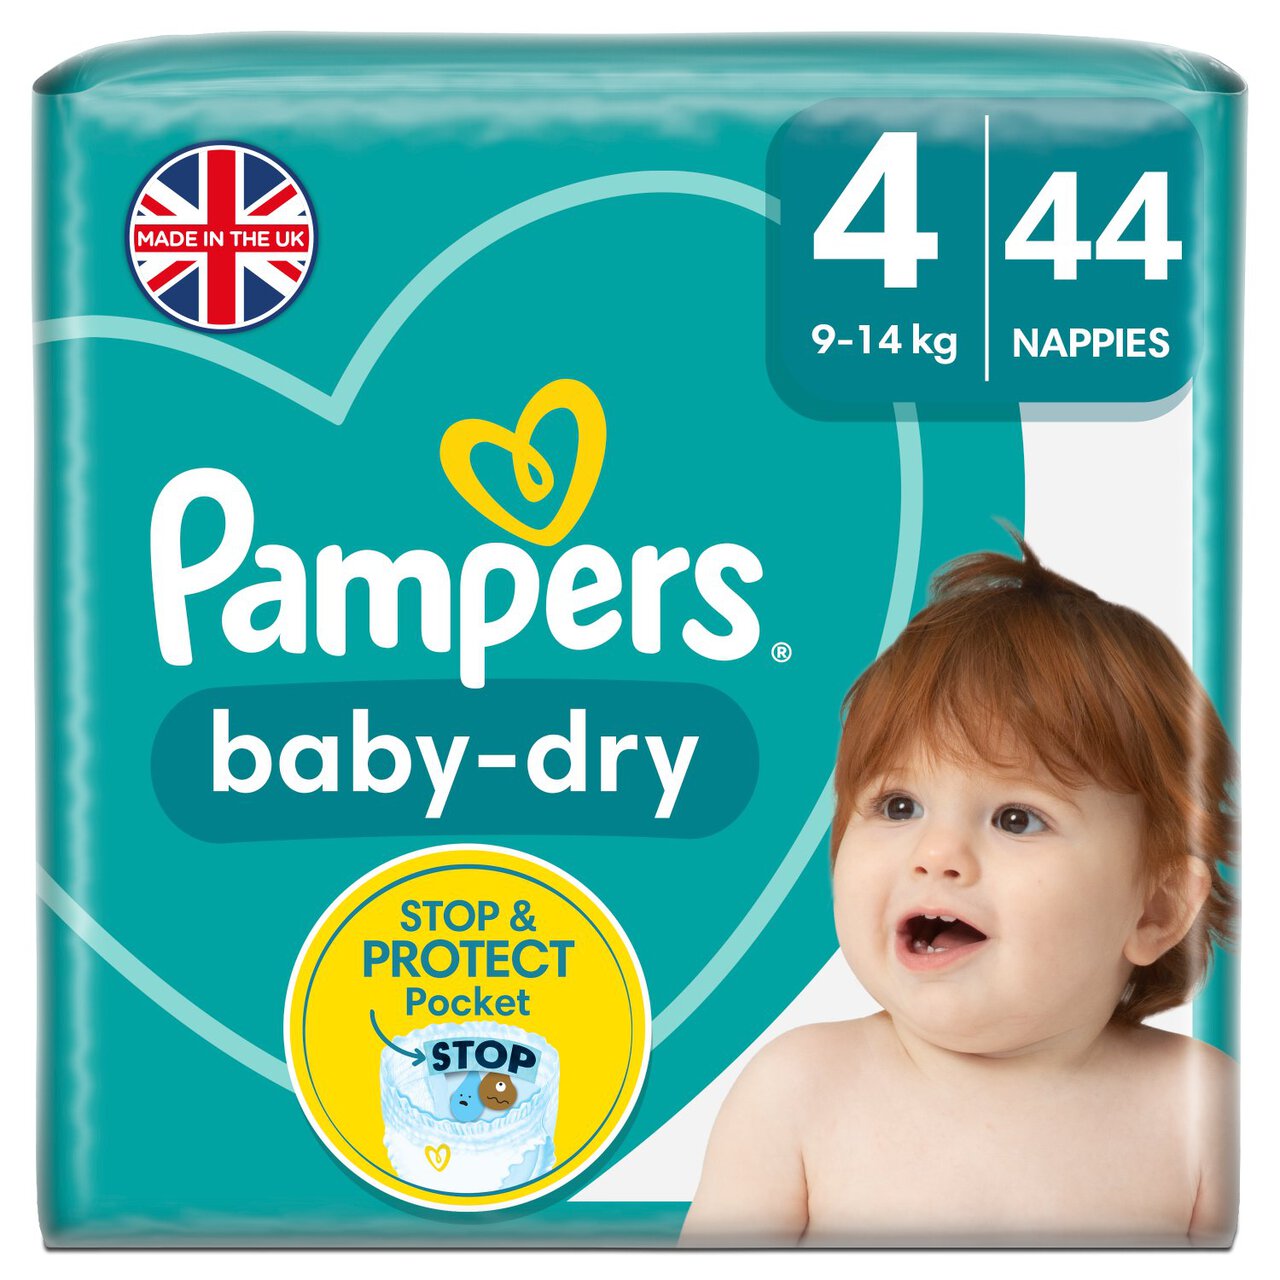 pampers 4+ 12h